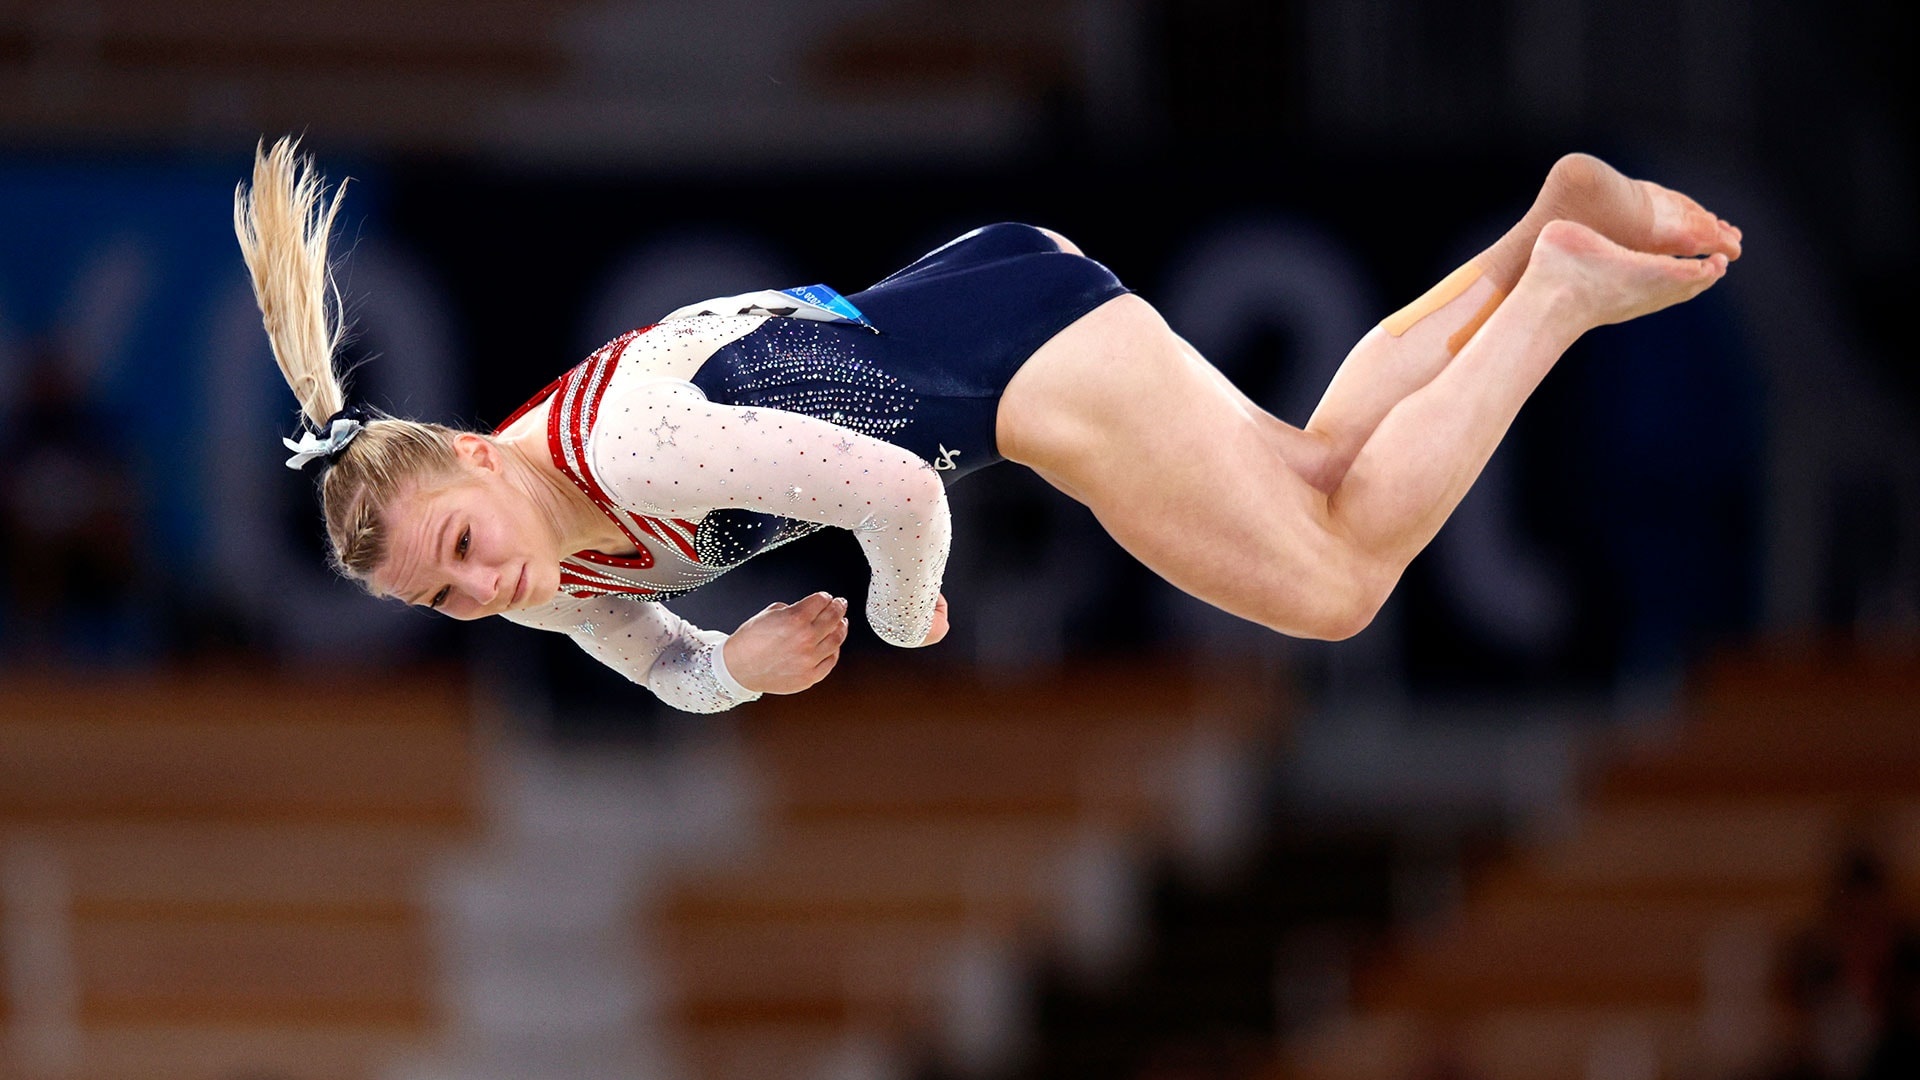 Floor (Gymnastics): Jade Carey, An American artistic gymnast who represented the United States at the 2020 Summer Olympics. 1920x1080 Full HD Background.